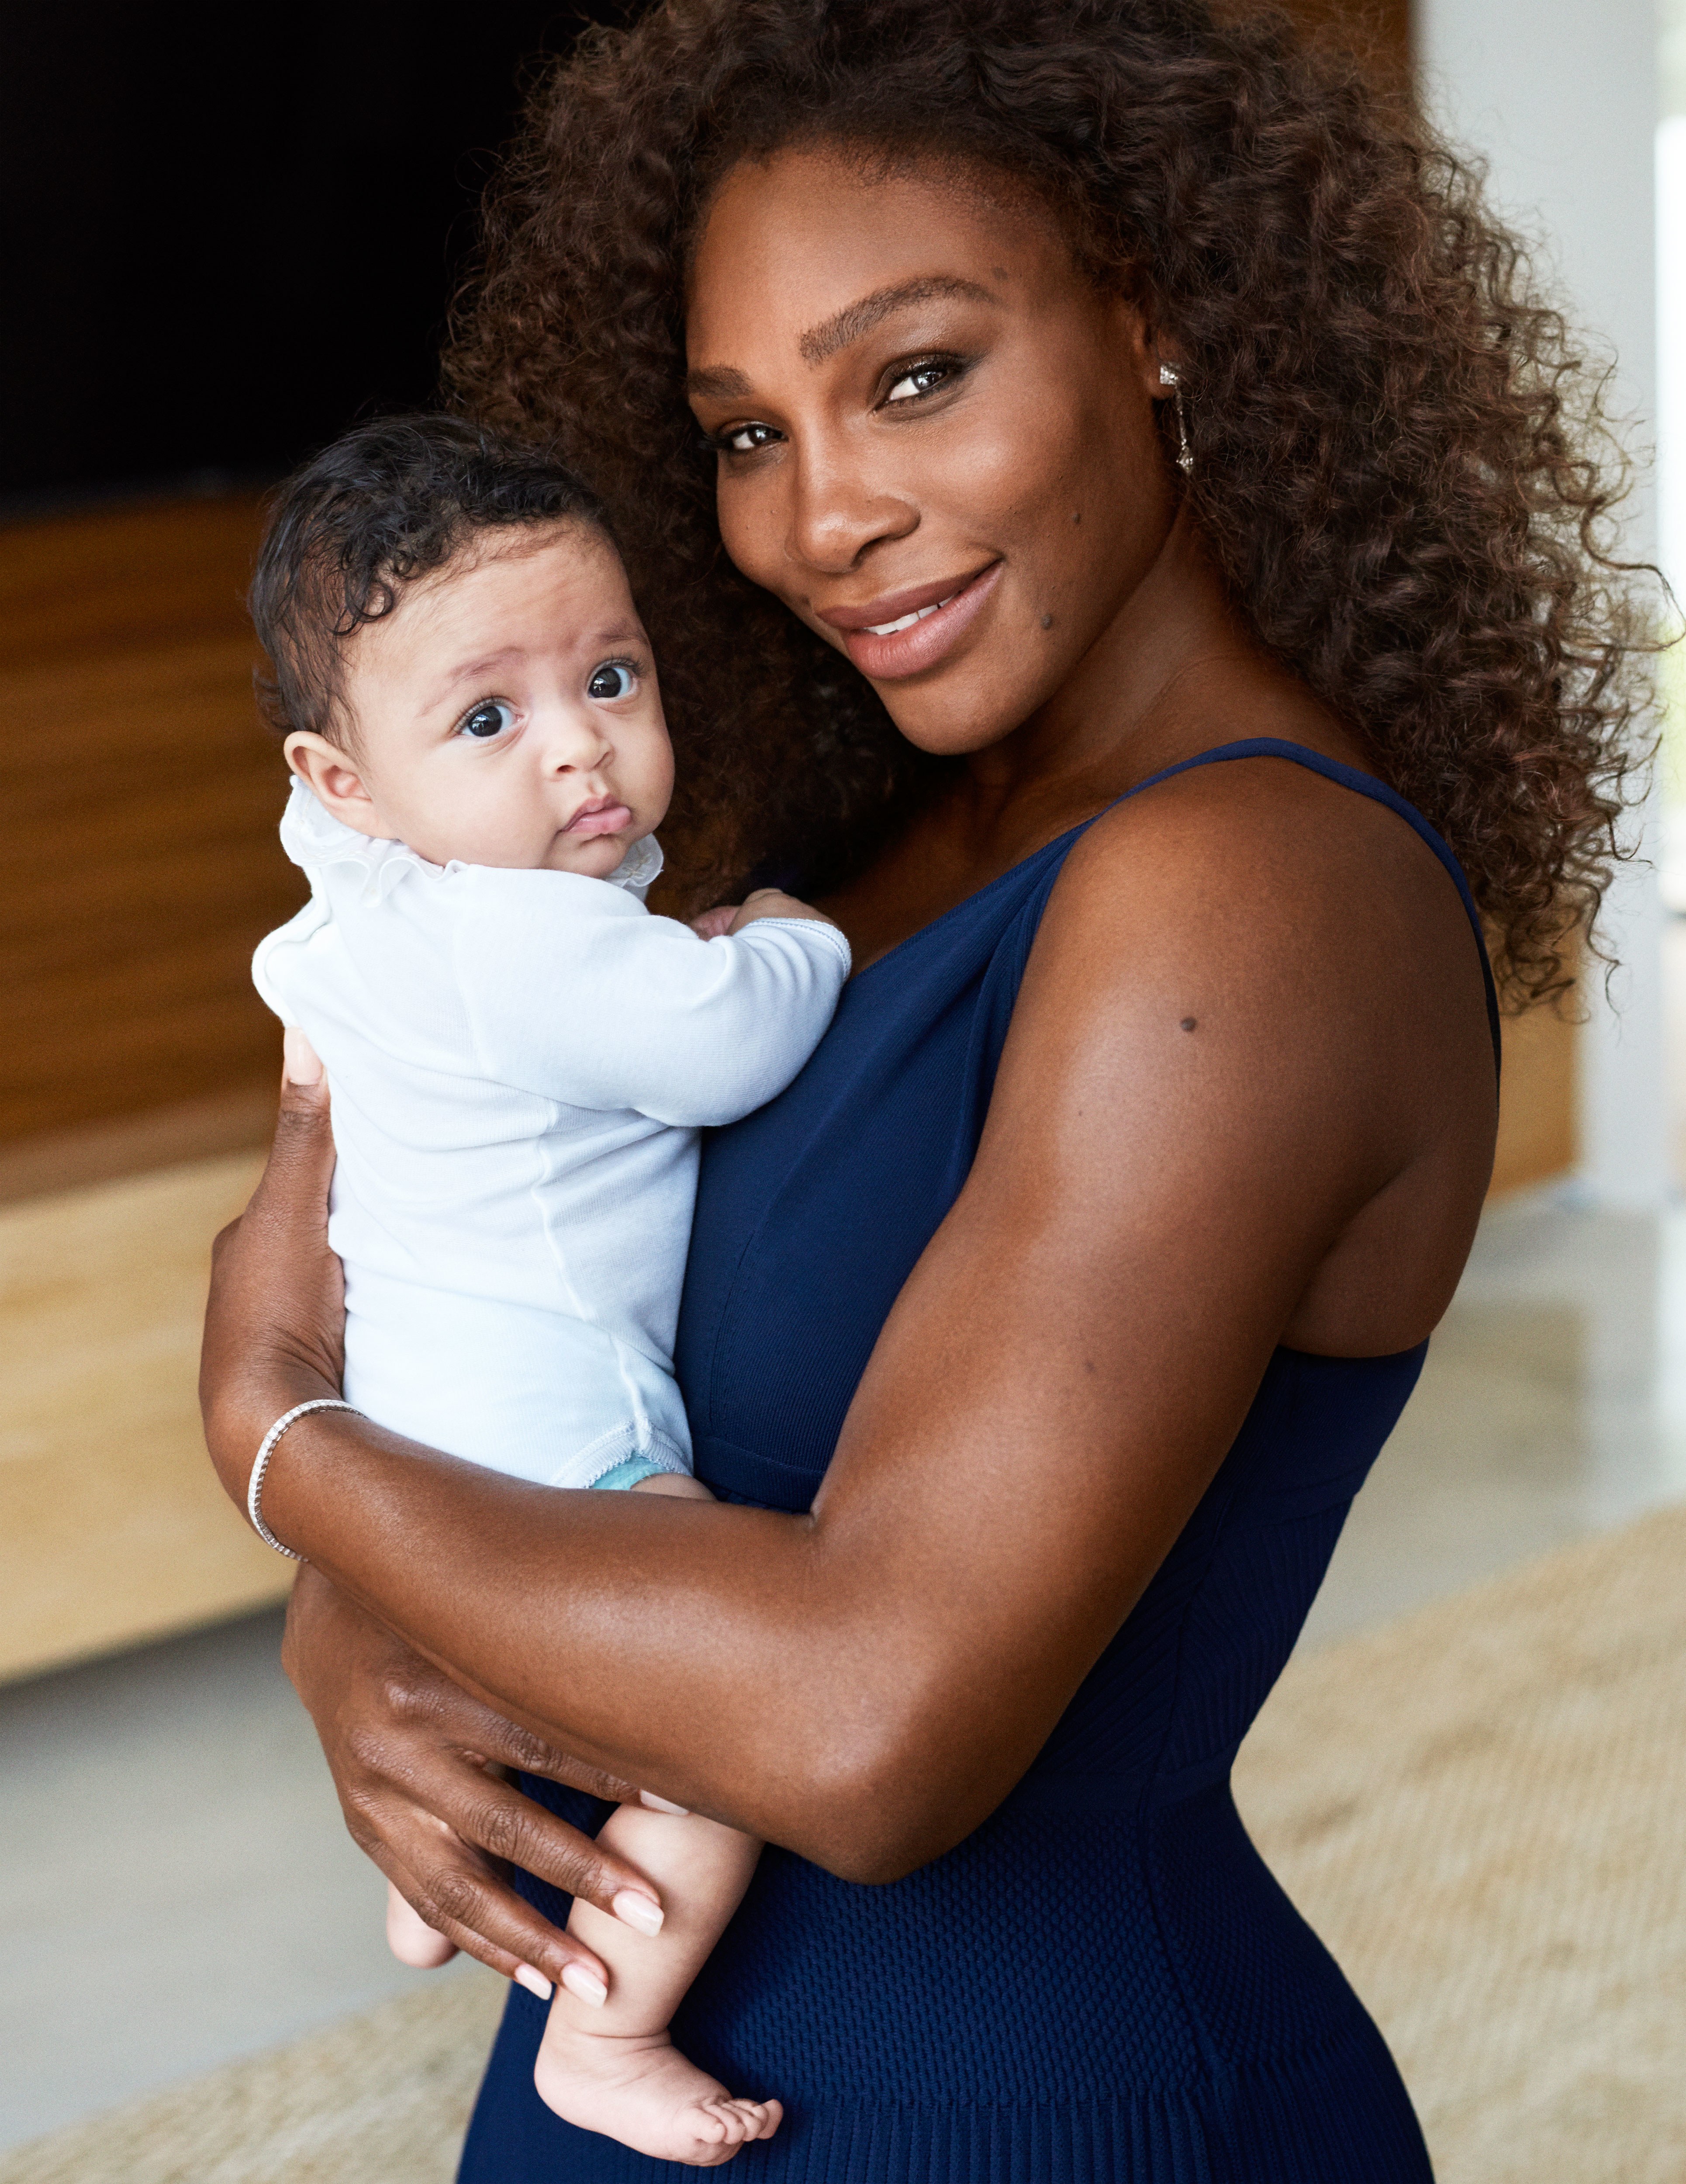 Serena Williams on Her Pregnancy, Motherhood and Making Her Tennis ...